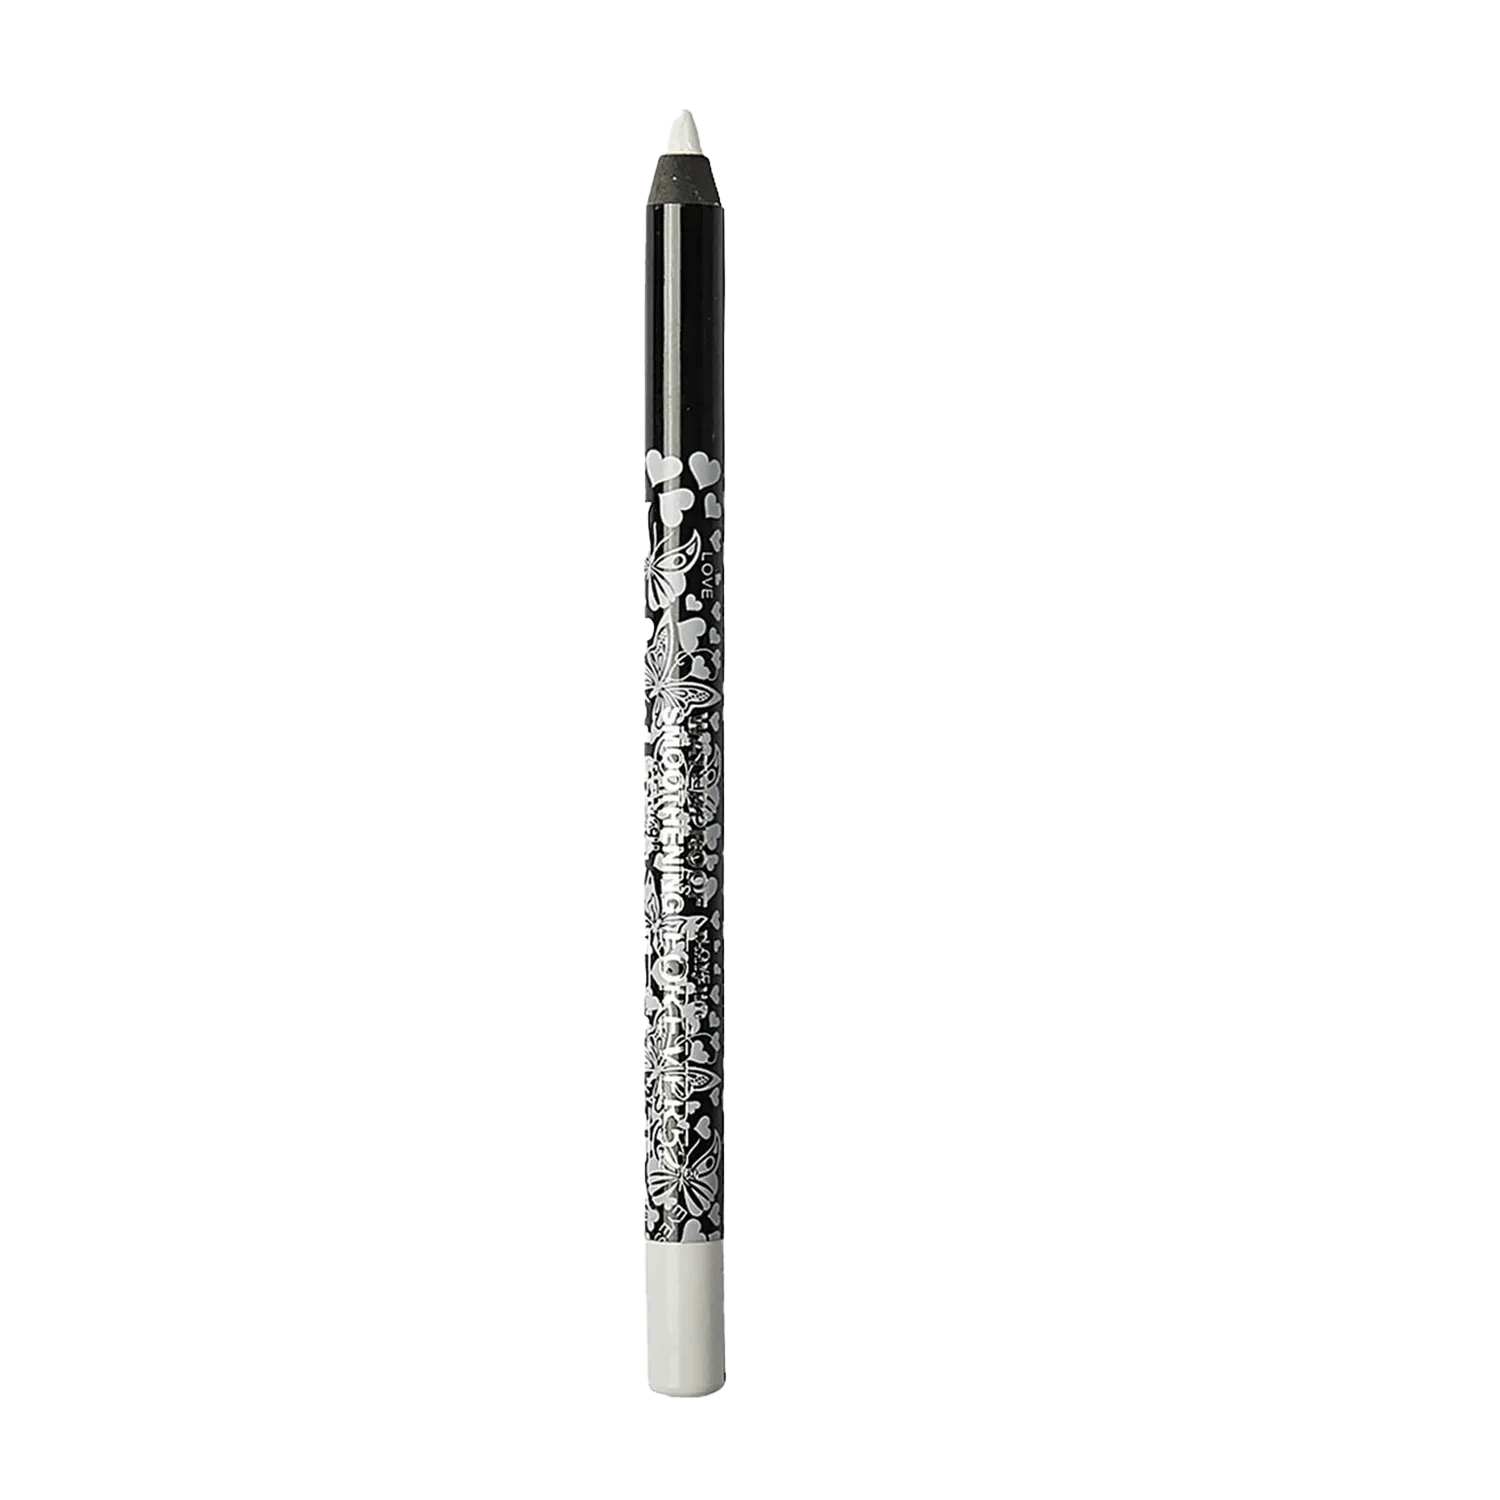 Daily Life Forever52 | Daily Life Forever52 Waterproof Smoothening Eye Pencil Cloud F512 (1gm)